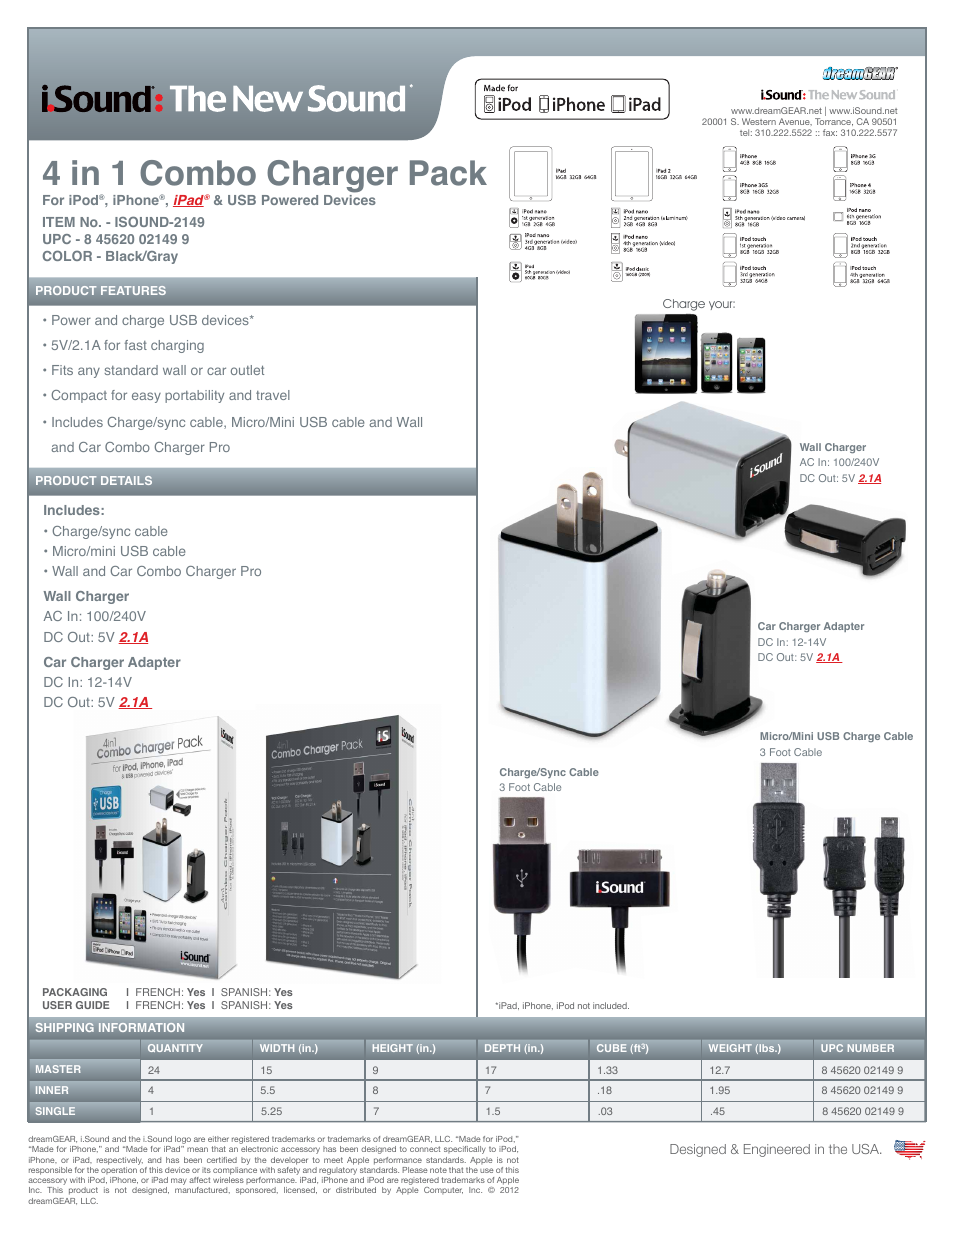 4 in 1 Combo Charger Pack - Sell Sheet